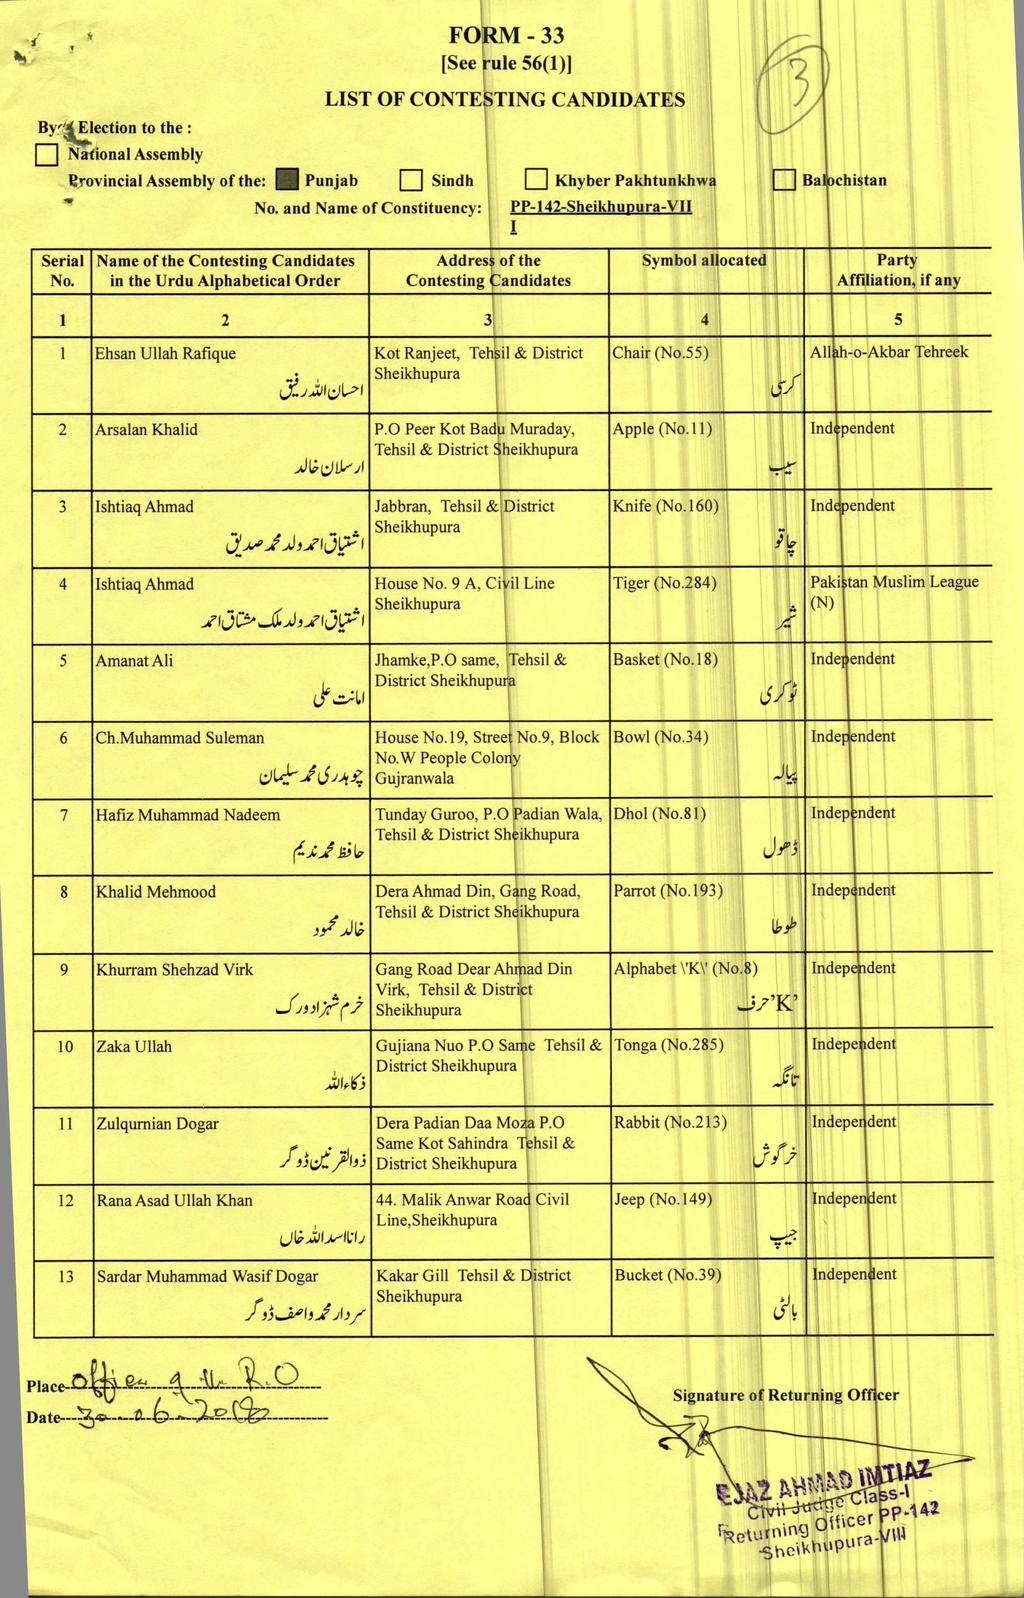 FO ti - 33 [See ule 56(1)] Bye' ection to the : El Rrovincial Assembly of the: II Punjab El Sindh Khyber Pakhtunkhwa and Name of Constituency: I PP-142-Sheikhupura-VII I 2 1 1 Ehsan Ullah Rafique.